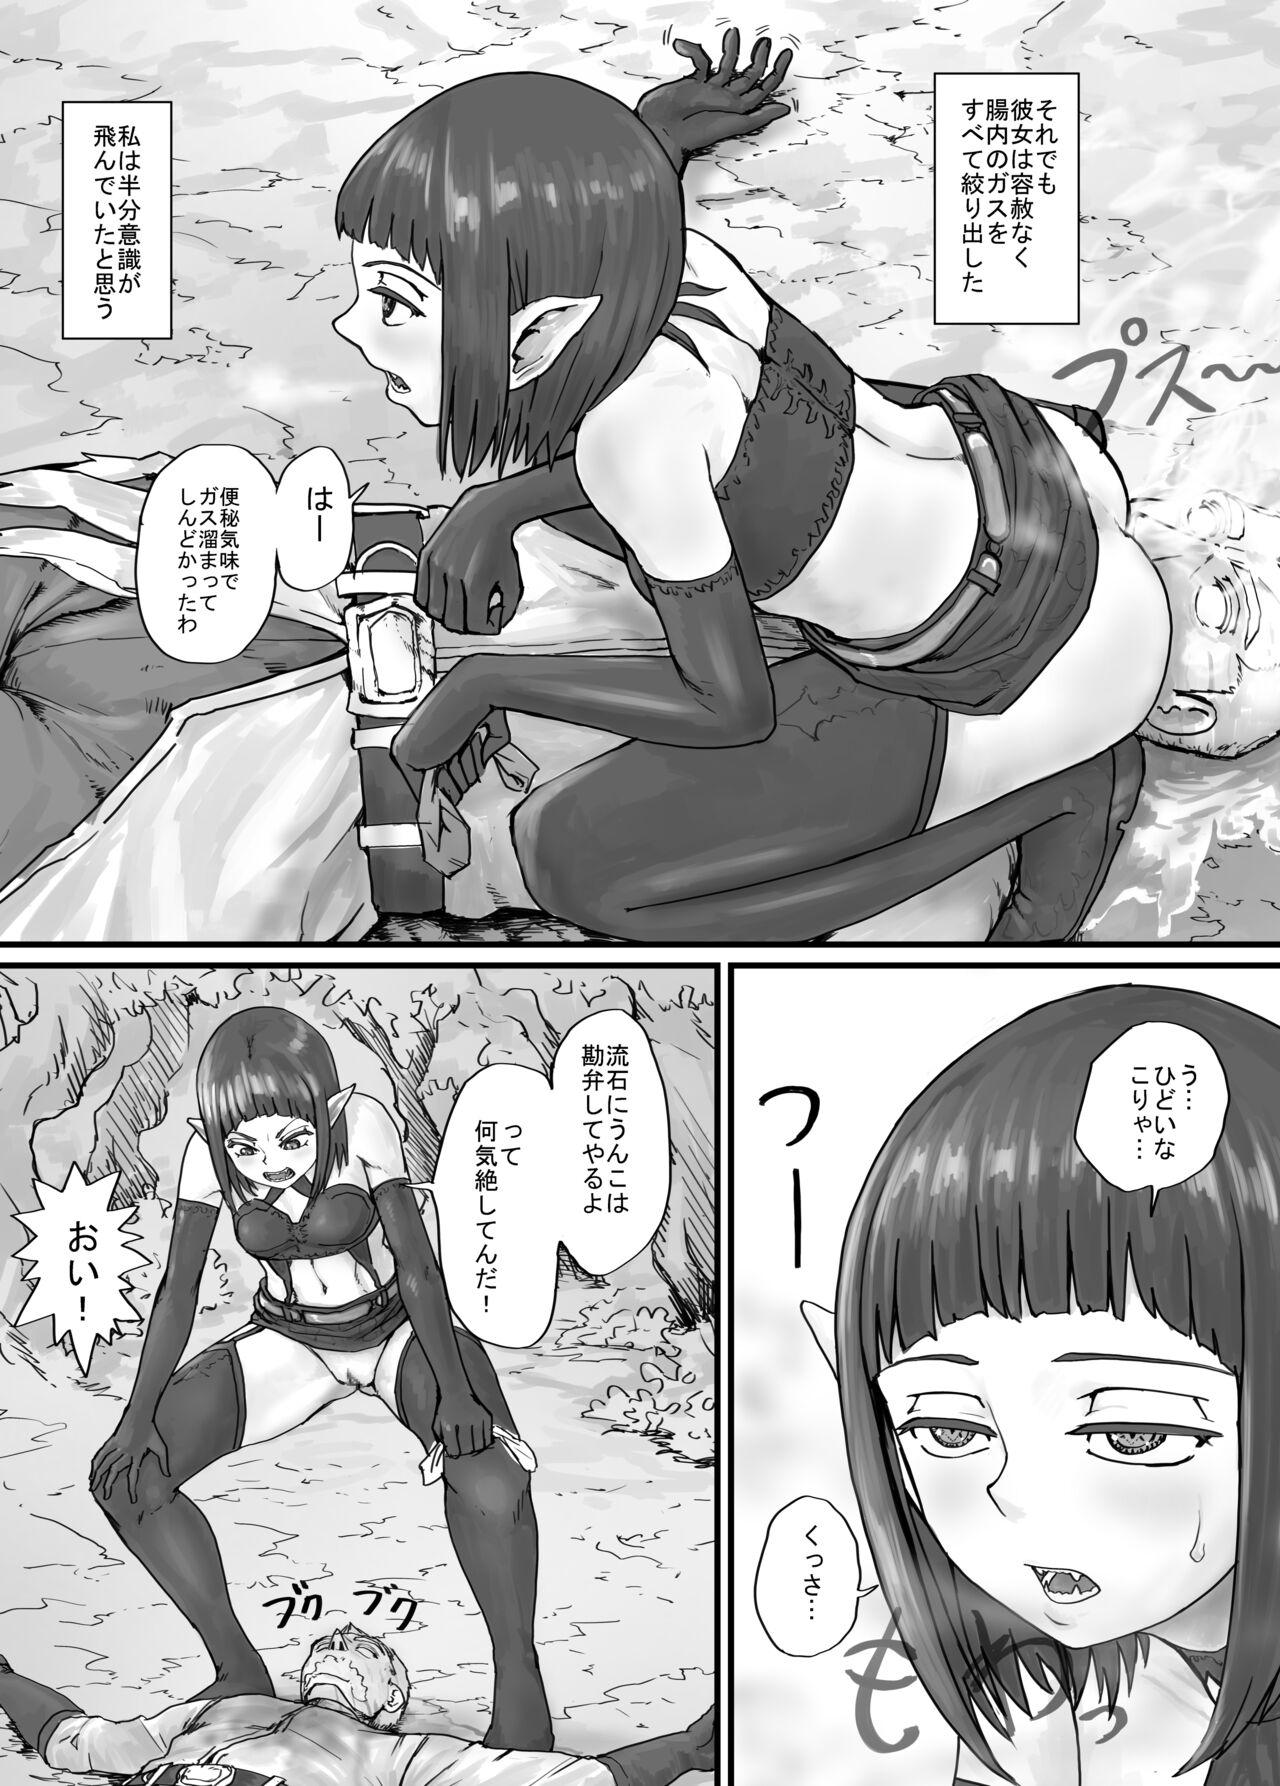 Gay Trimmed 魔族ちゃん漫画1 - Original Deutsch - Page 22